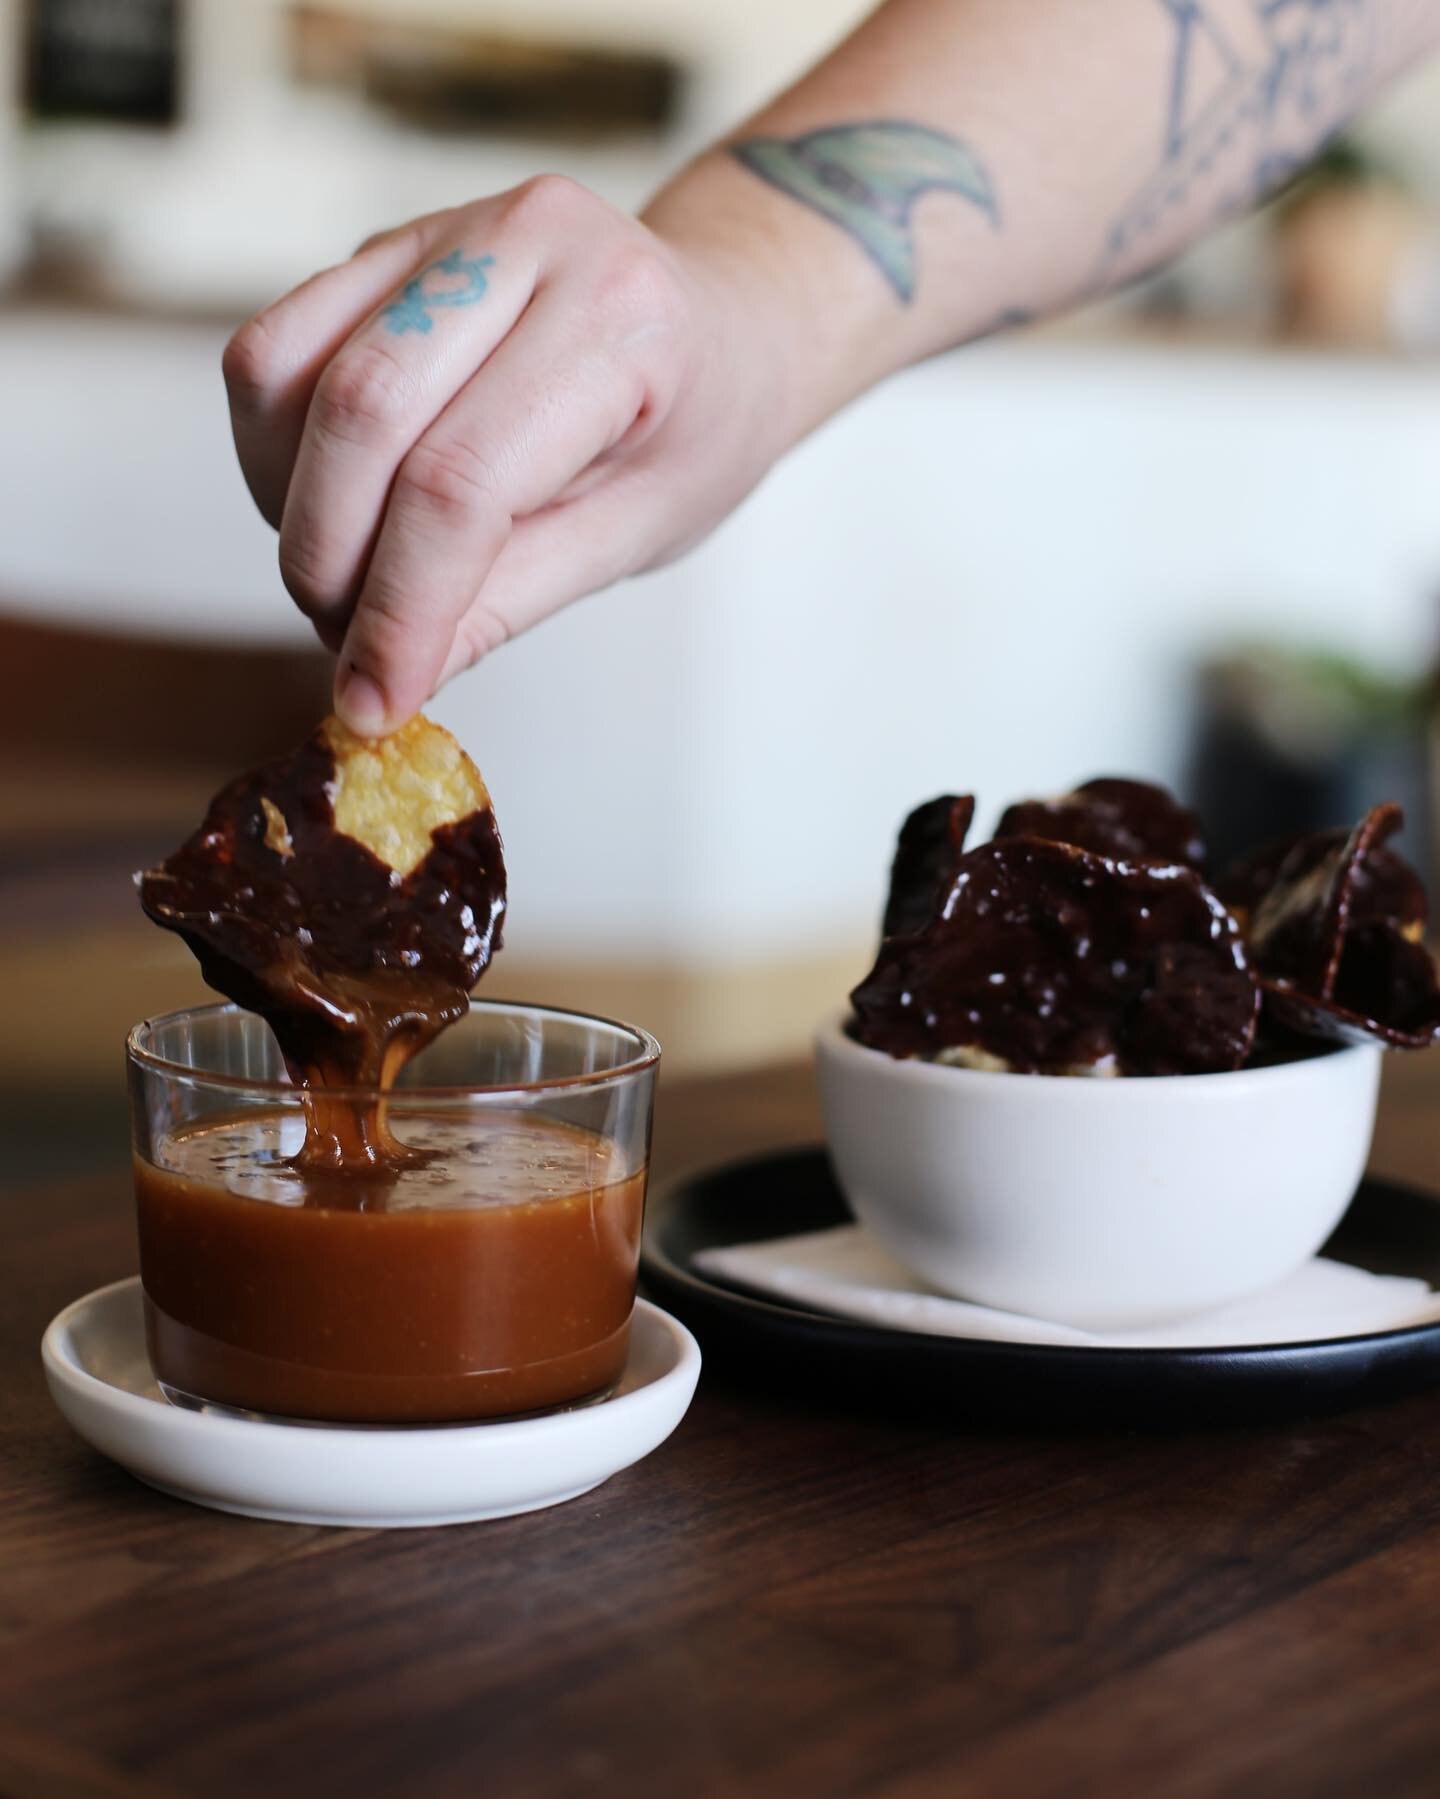 Chips and dip, but for your sweet tooth. We&rsquo;re dipping our house made sea salt potato chips in dark chocolate and serving them with dulce de leche dipping sauce this weekend, come through. Available tomorrow through Sunday while supplies last.